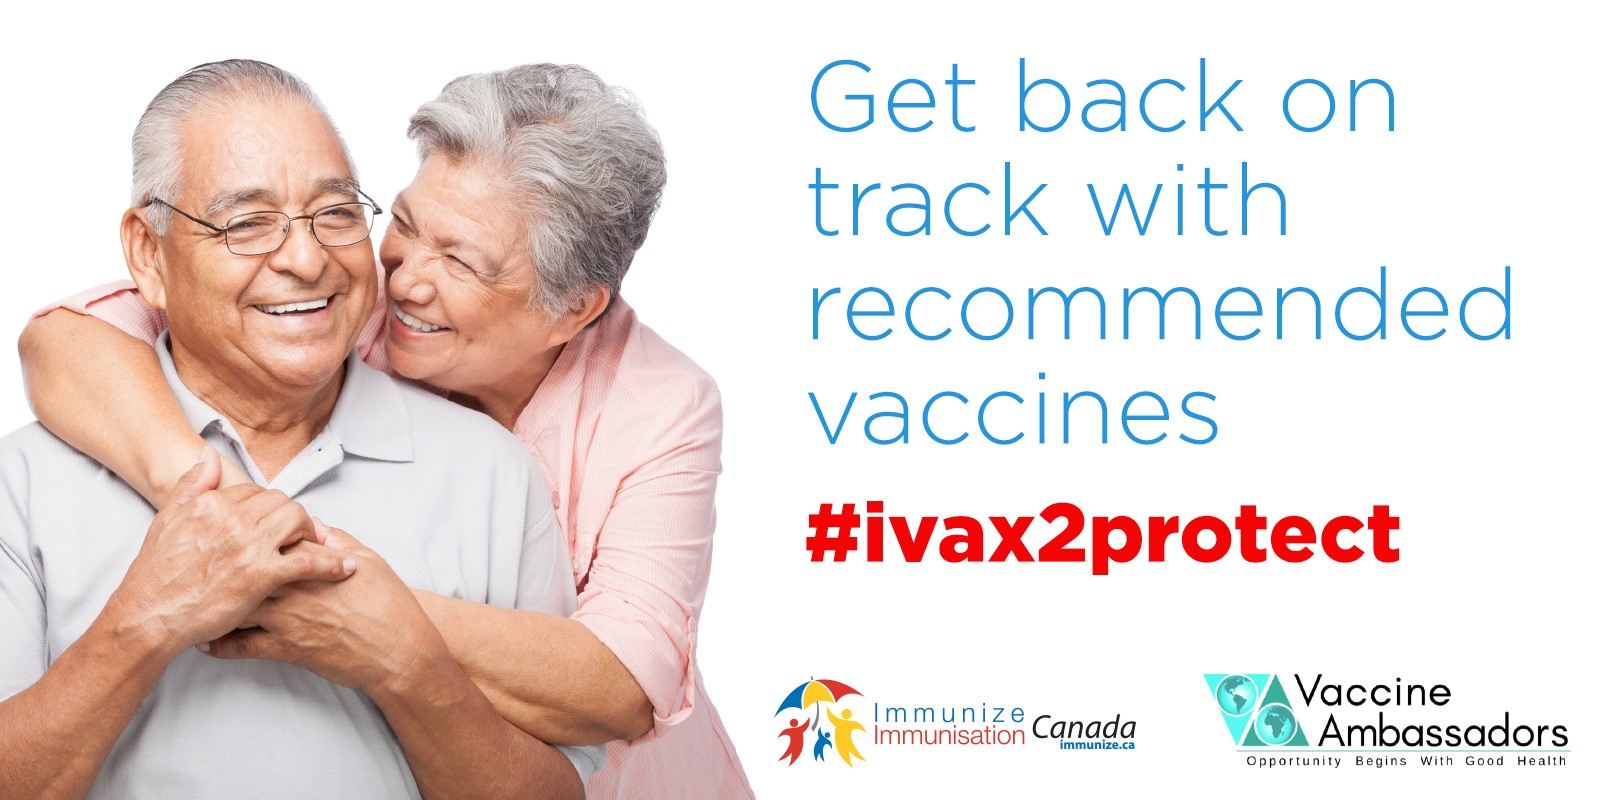 Older adults: Get back on track with recommended vaccinations.